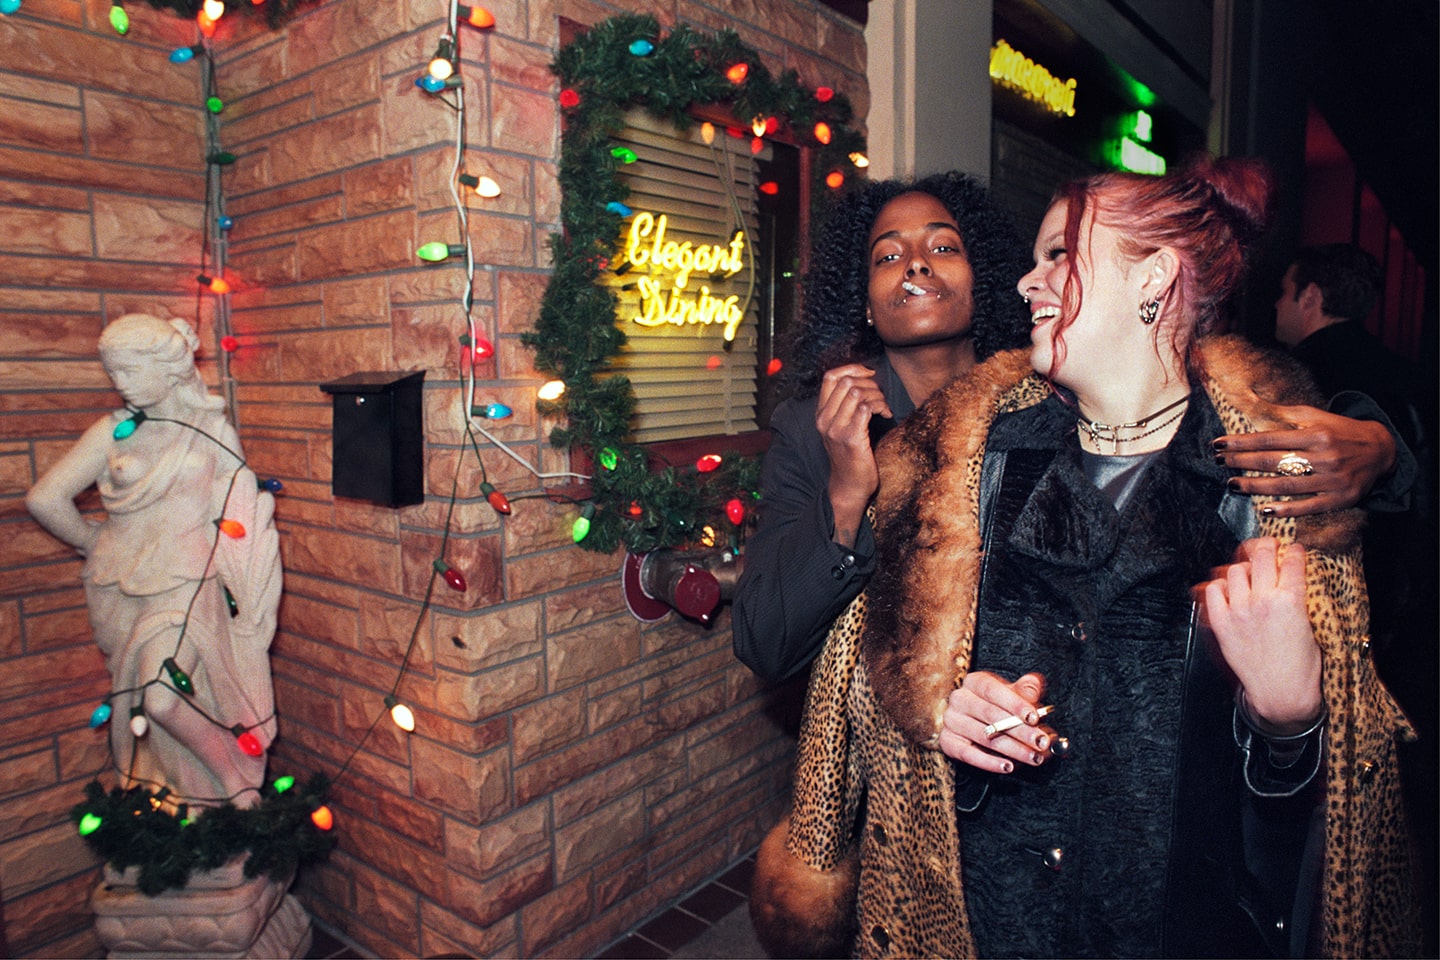 Two people smoke cigarettes in front of Christmas lights and a neon sign that says "Elegant Dining." One wears an open leopard print coat.